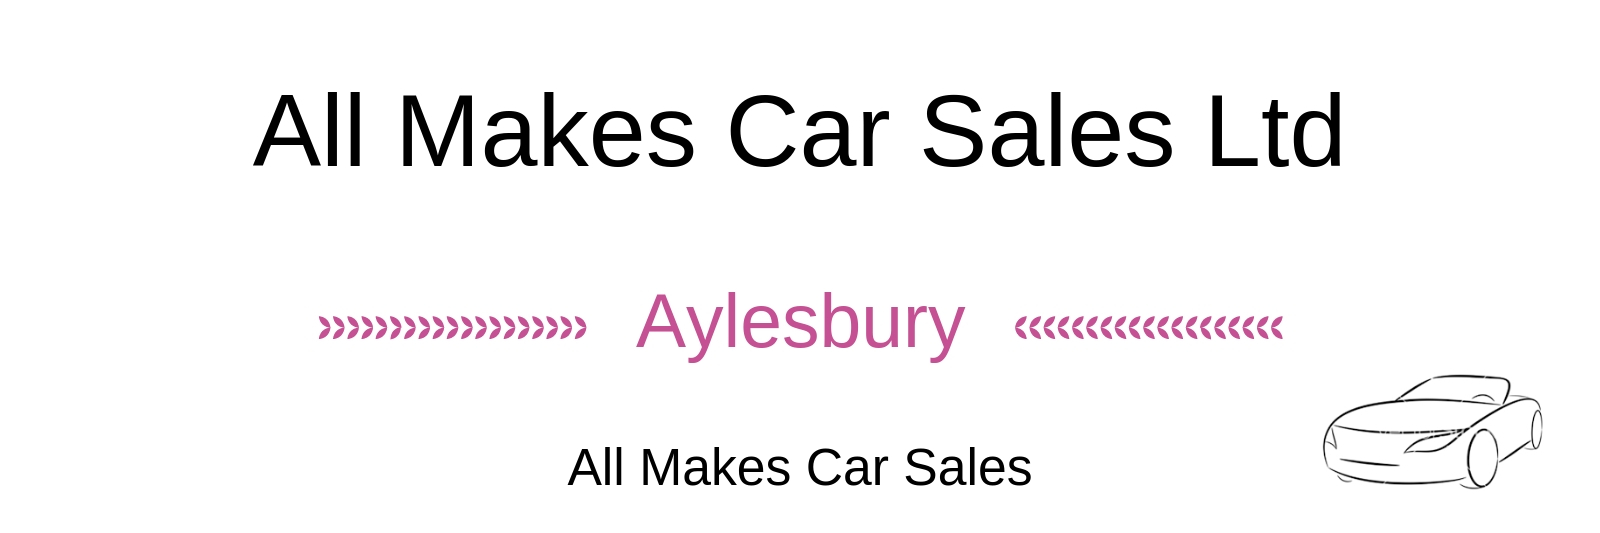 All Makes Car Sales Ltd - Used Cars For Sale Aylesbury